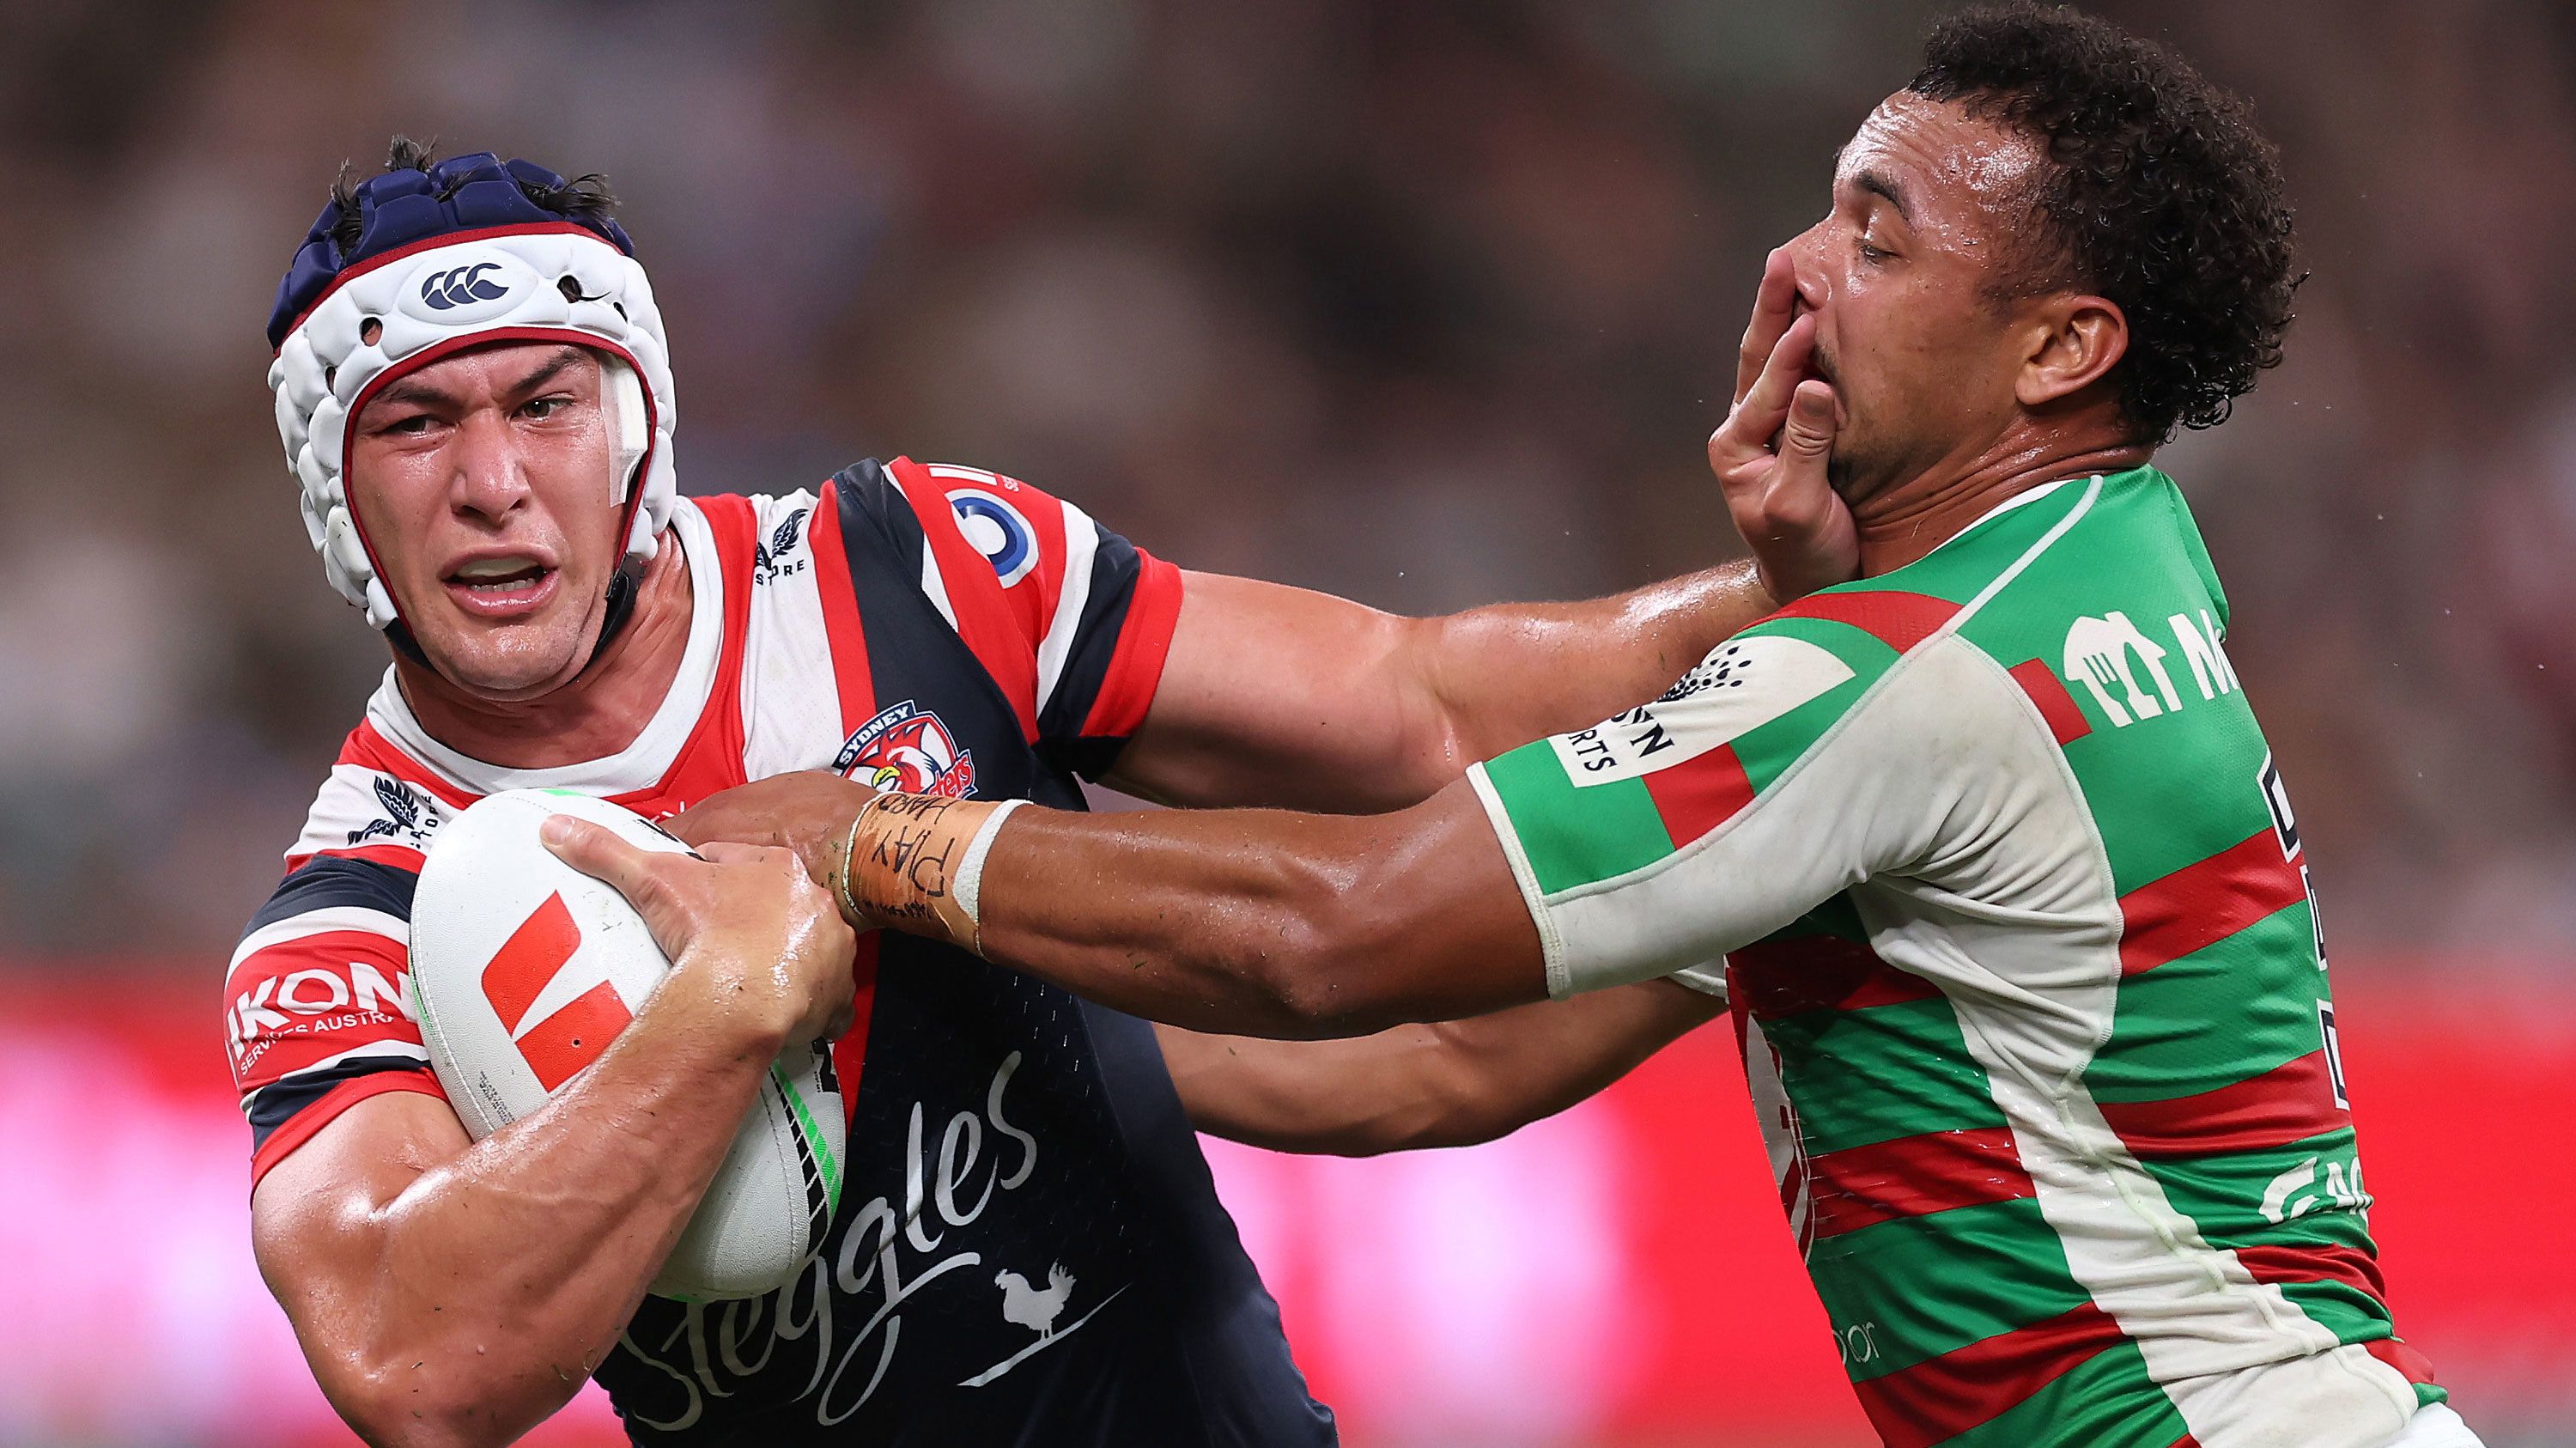 Joseph Manu of the Roosters is tackled by Isaiah Tass of the Rabbitohs during their round three match. 